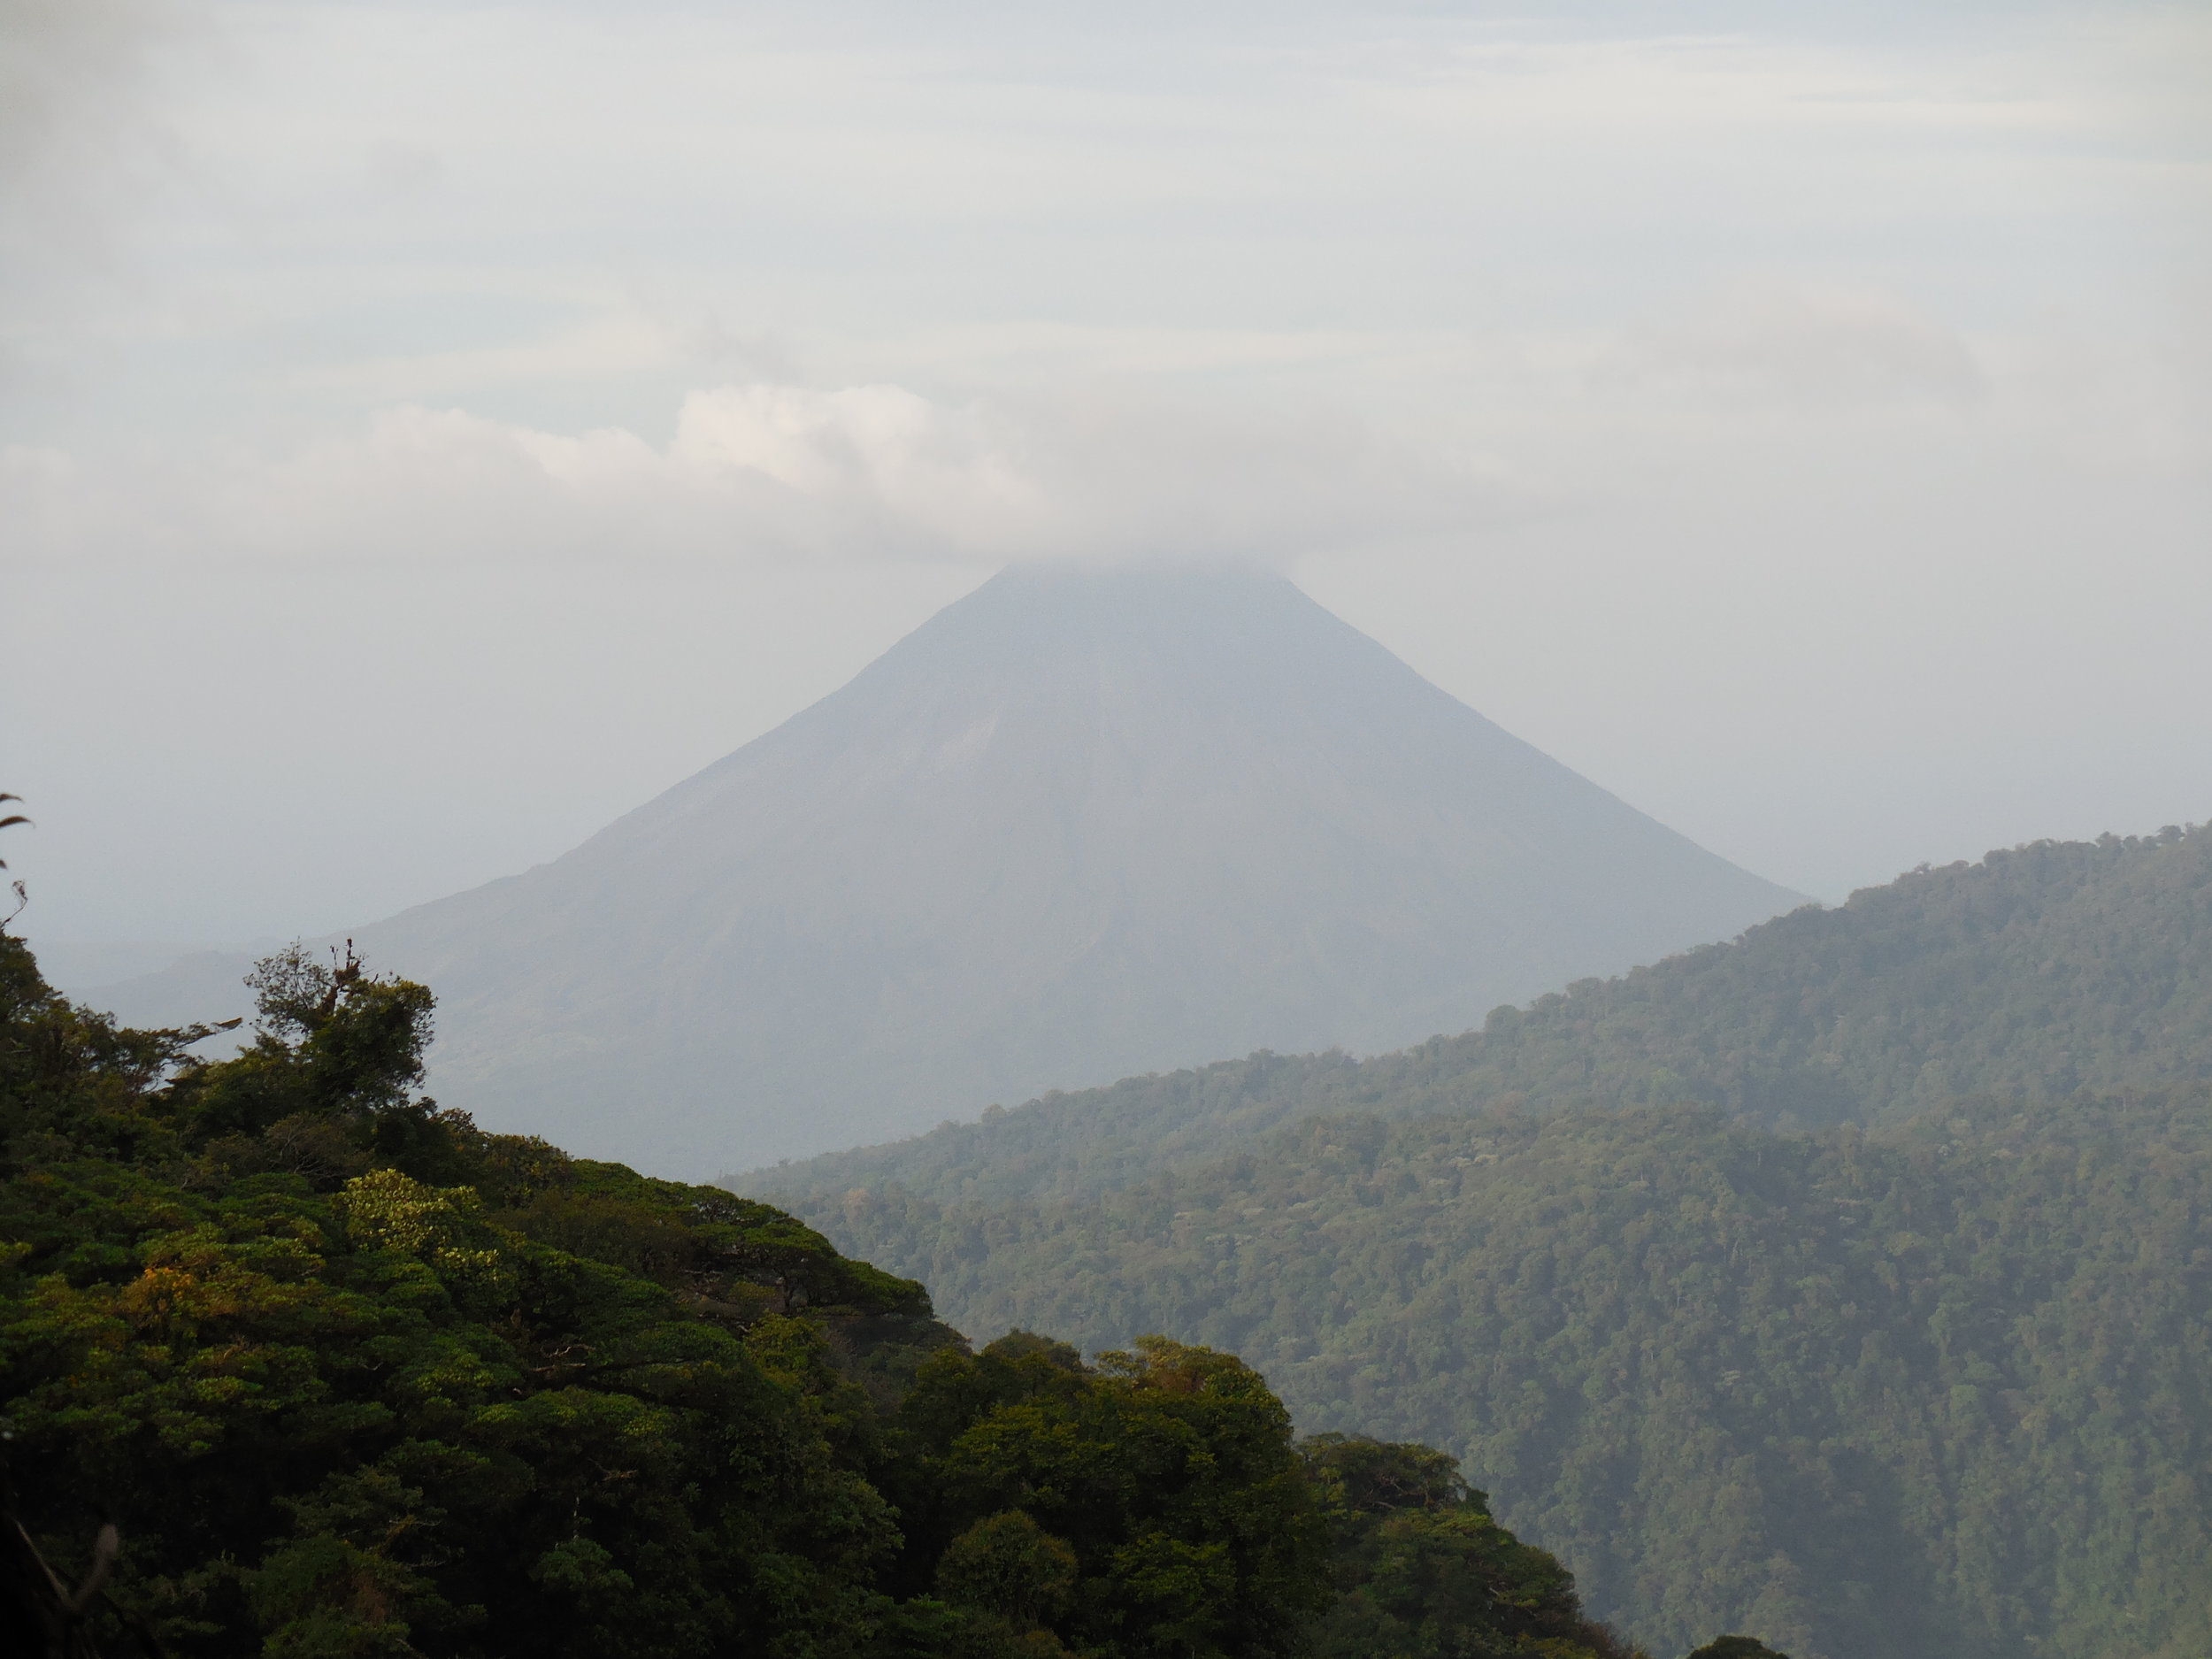 View of Arenal Volcano